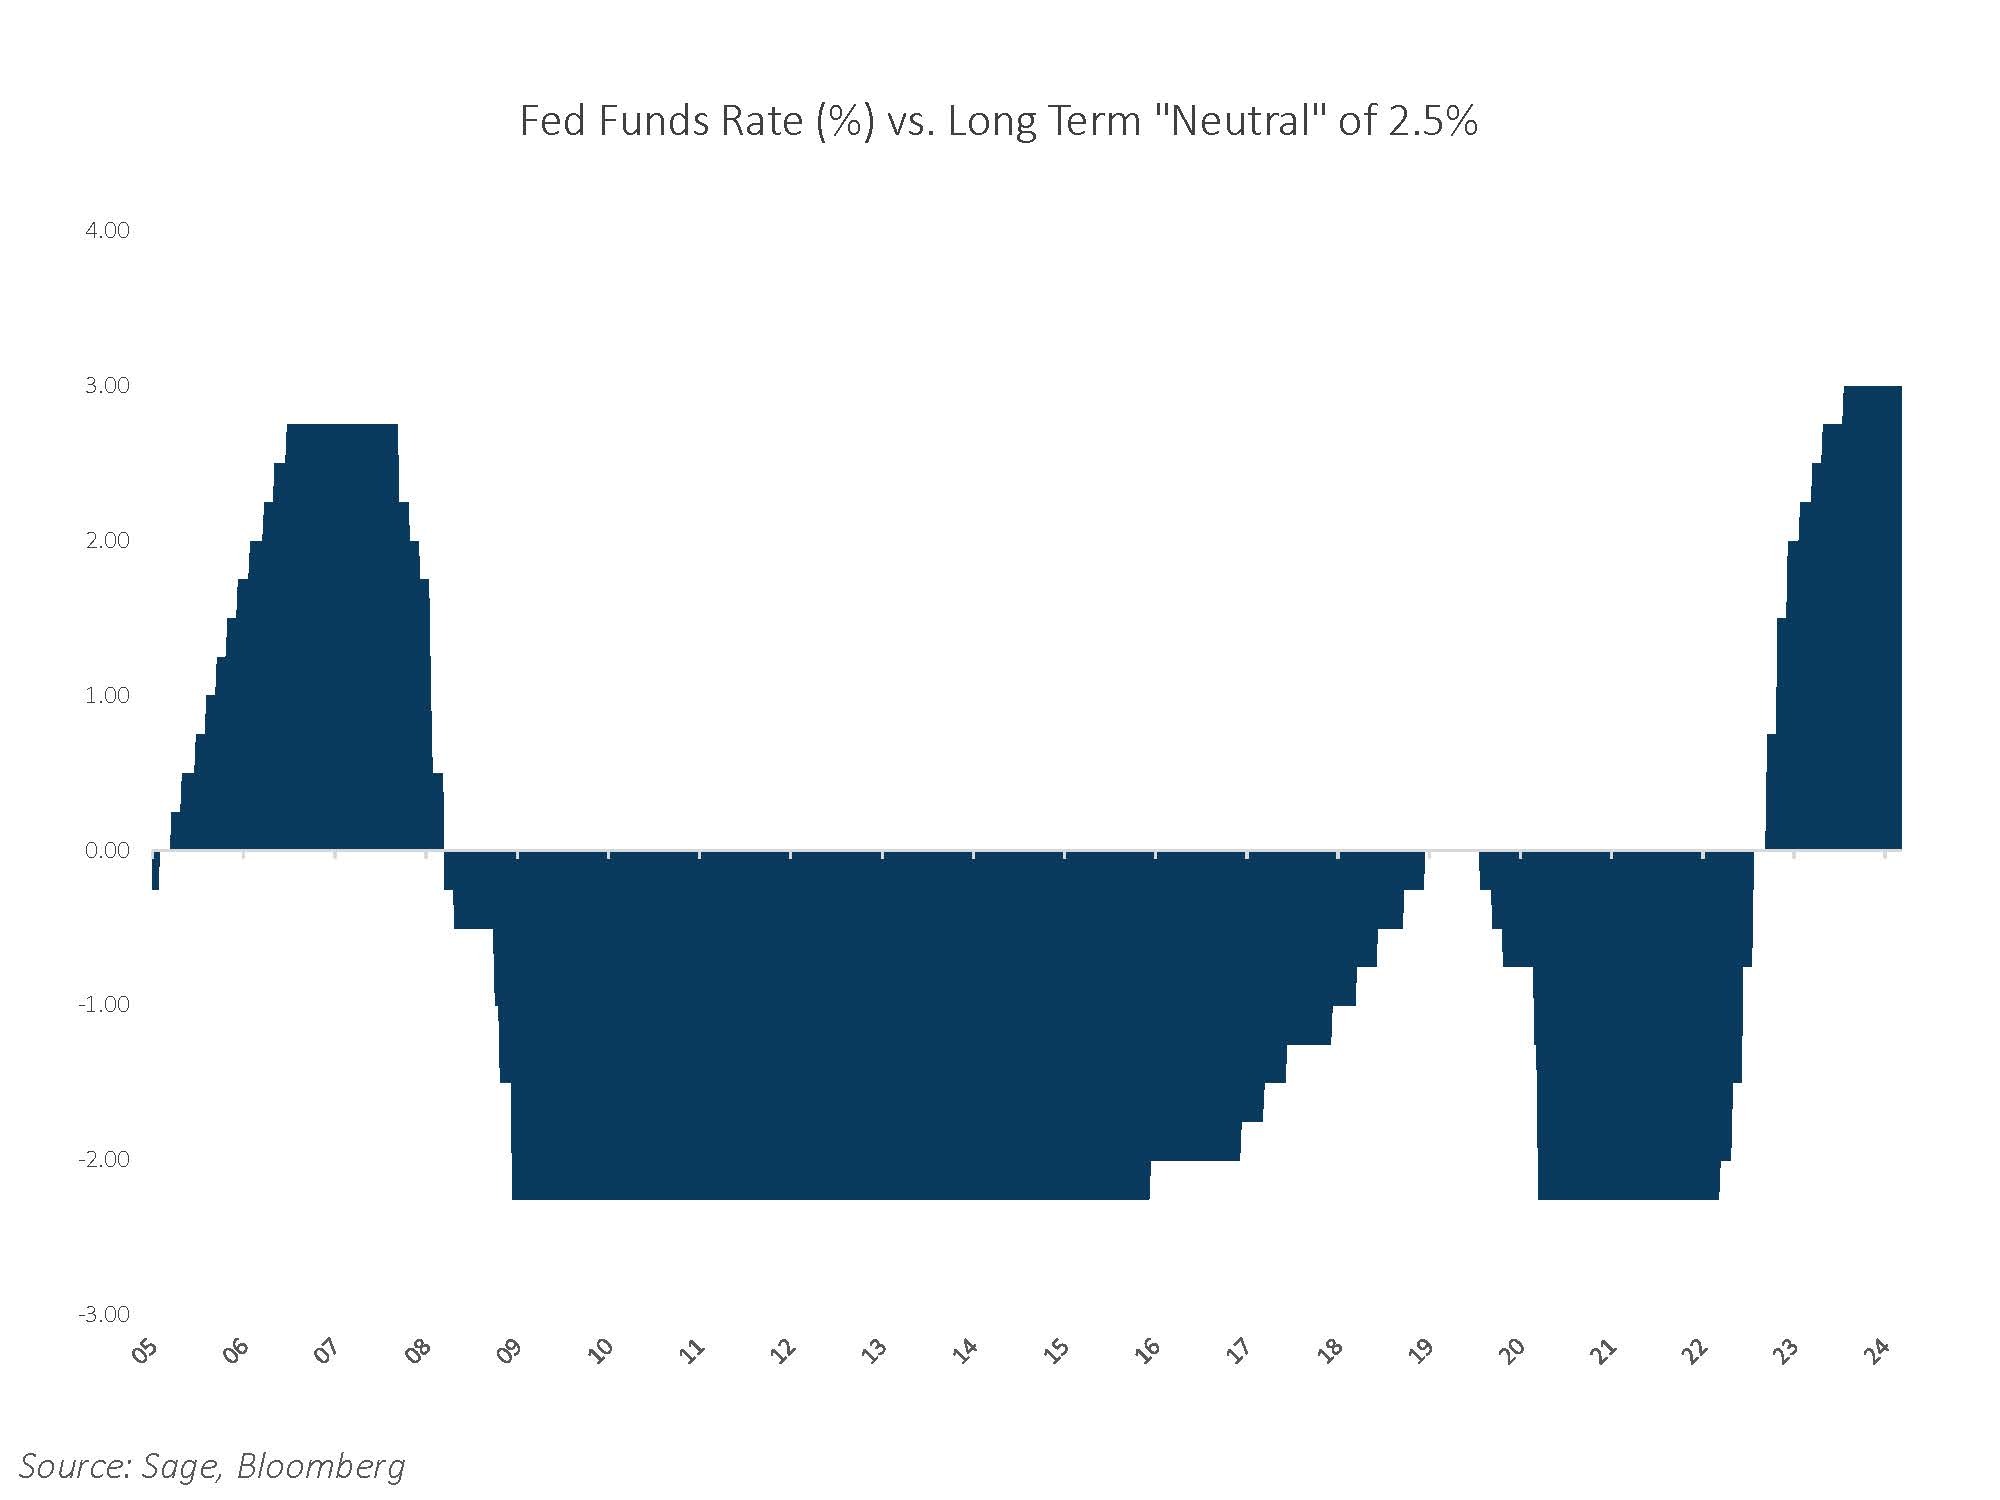 Fed Funds Rate percentage vs long-term neutral of 2.5 percent